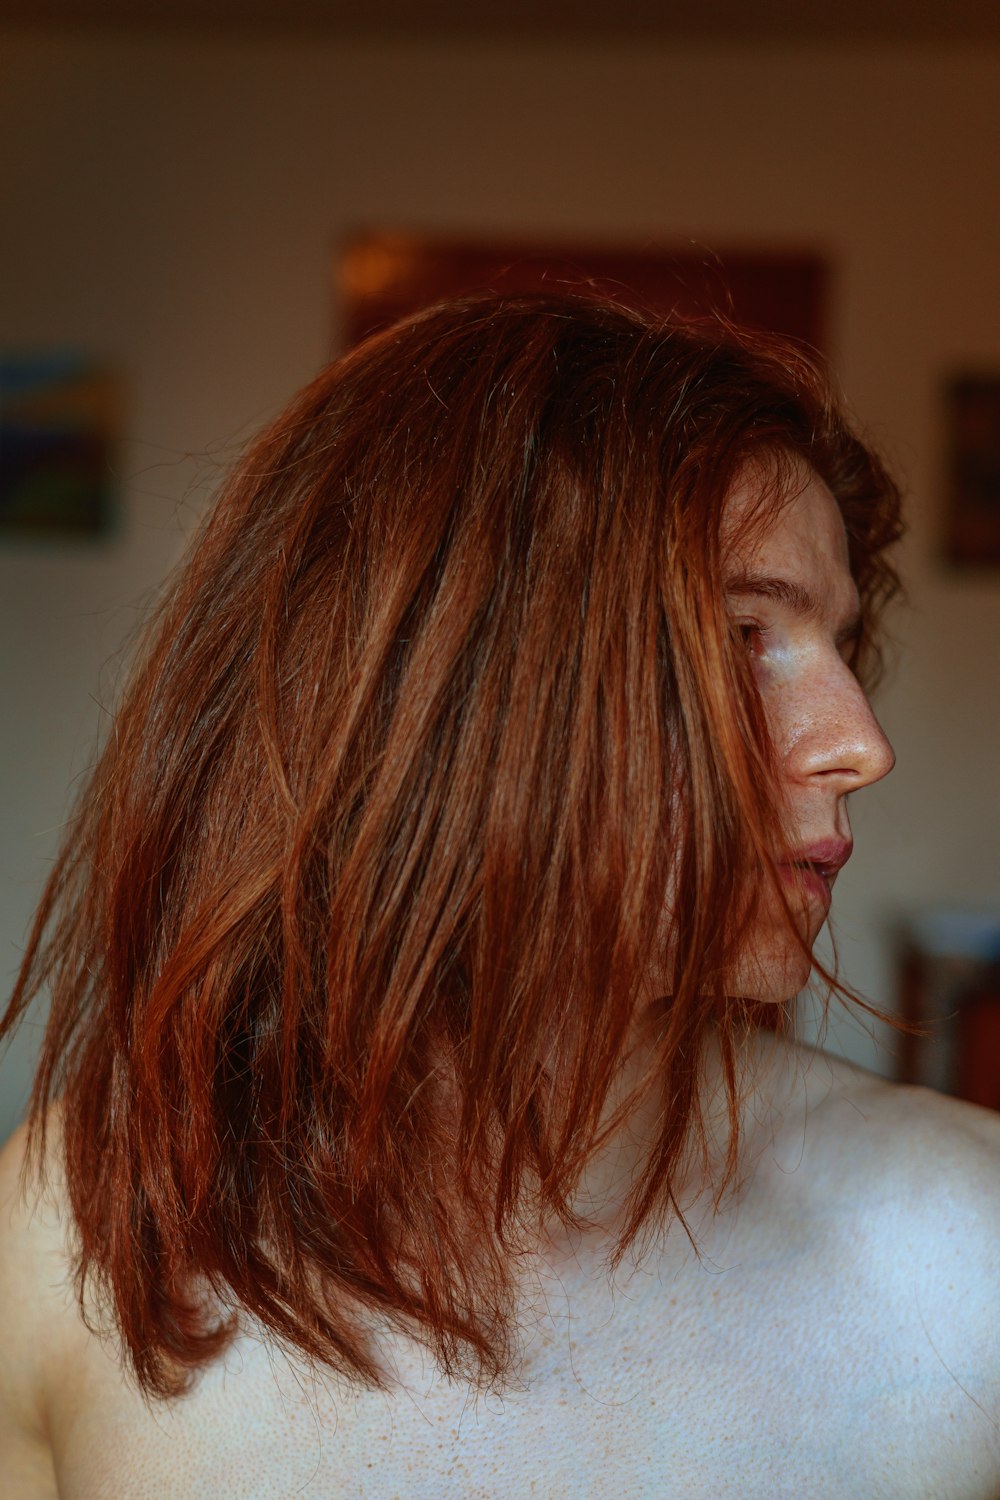 a woman with red hair and no shirt on